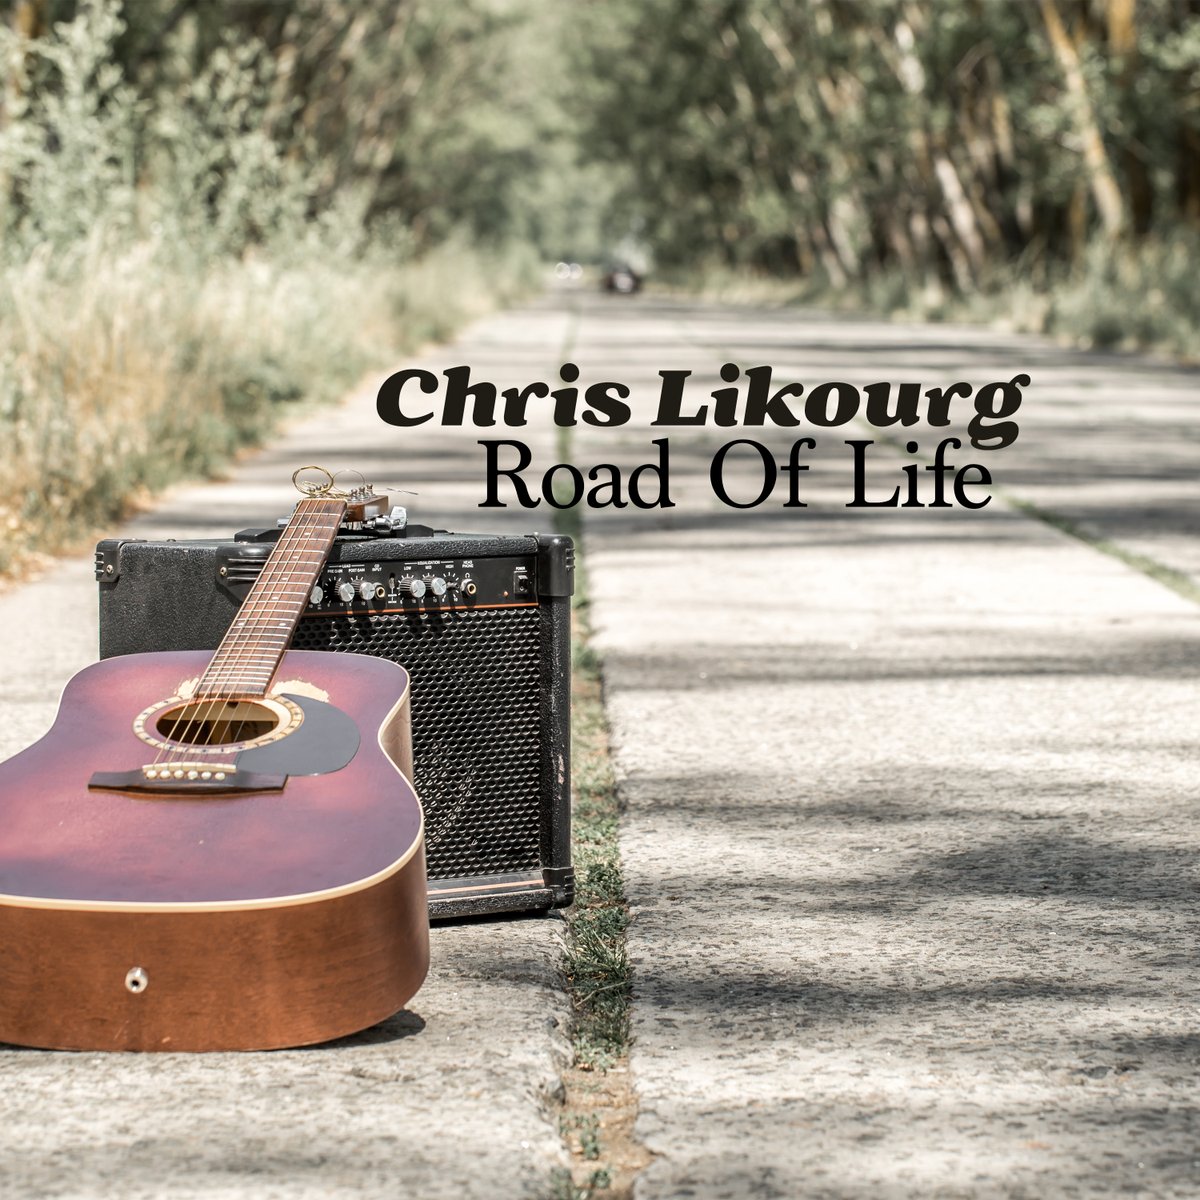 Chris Likourg is a singer/songwriter from New Brunswick, Canada. This song is about the hope we carry throught life and that each day is a brand new day! youtu.be/TYhjKVv8-kg